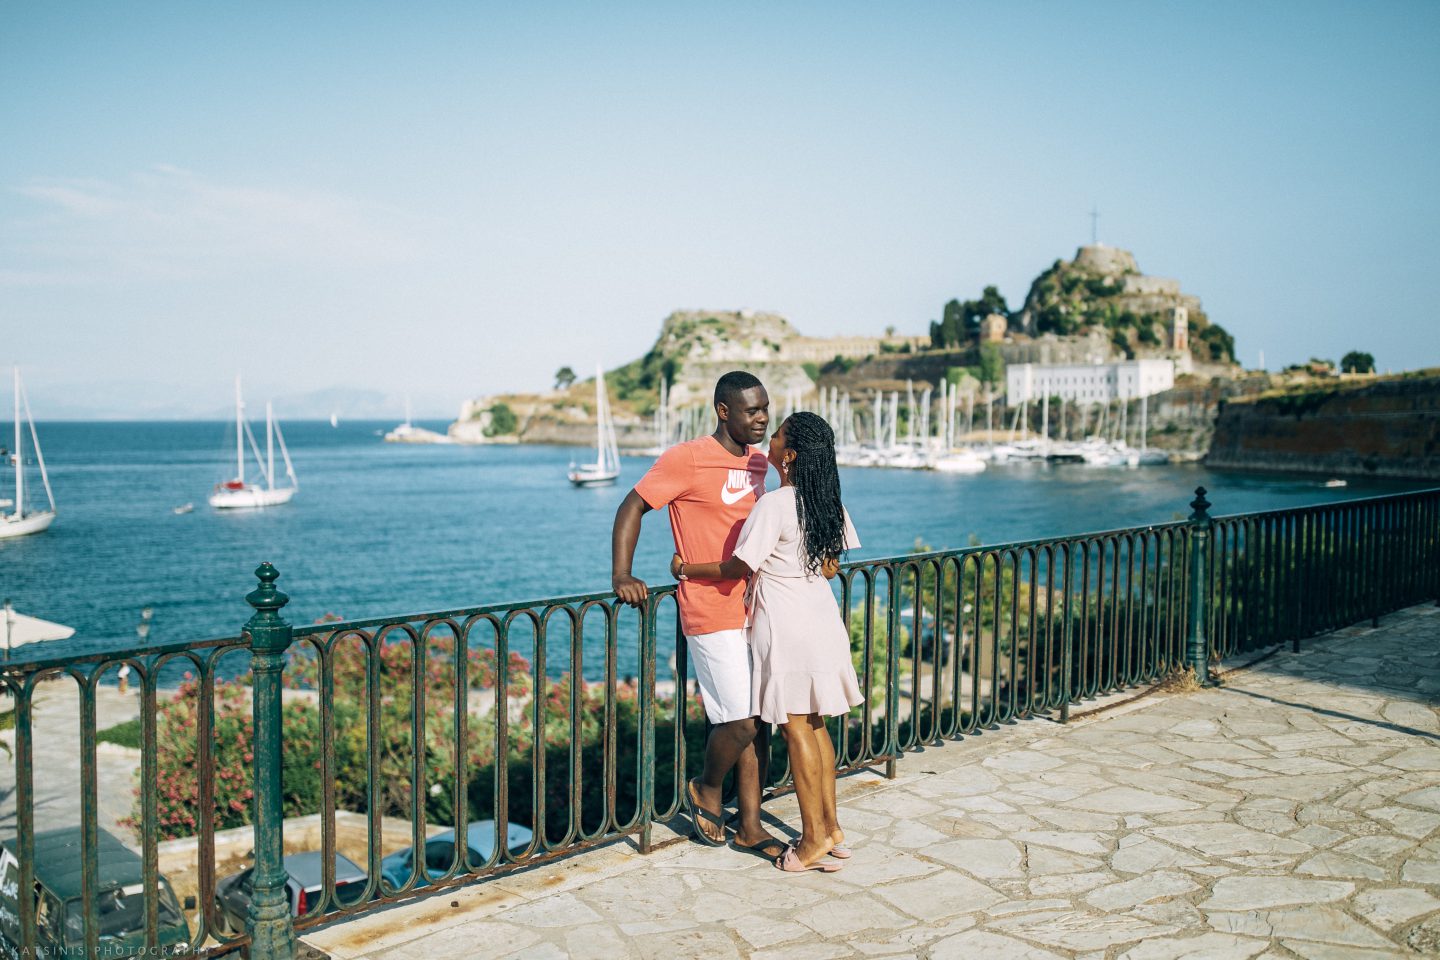 corfu, greece, married, wedding anniversary, sea vew, kerkyra, old town, black couple, standing, sunny, holiday, great view, marriage